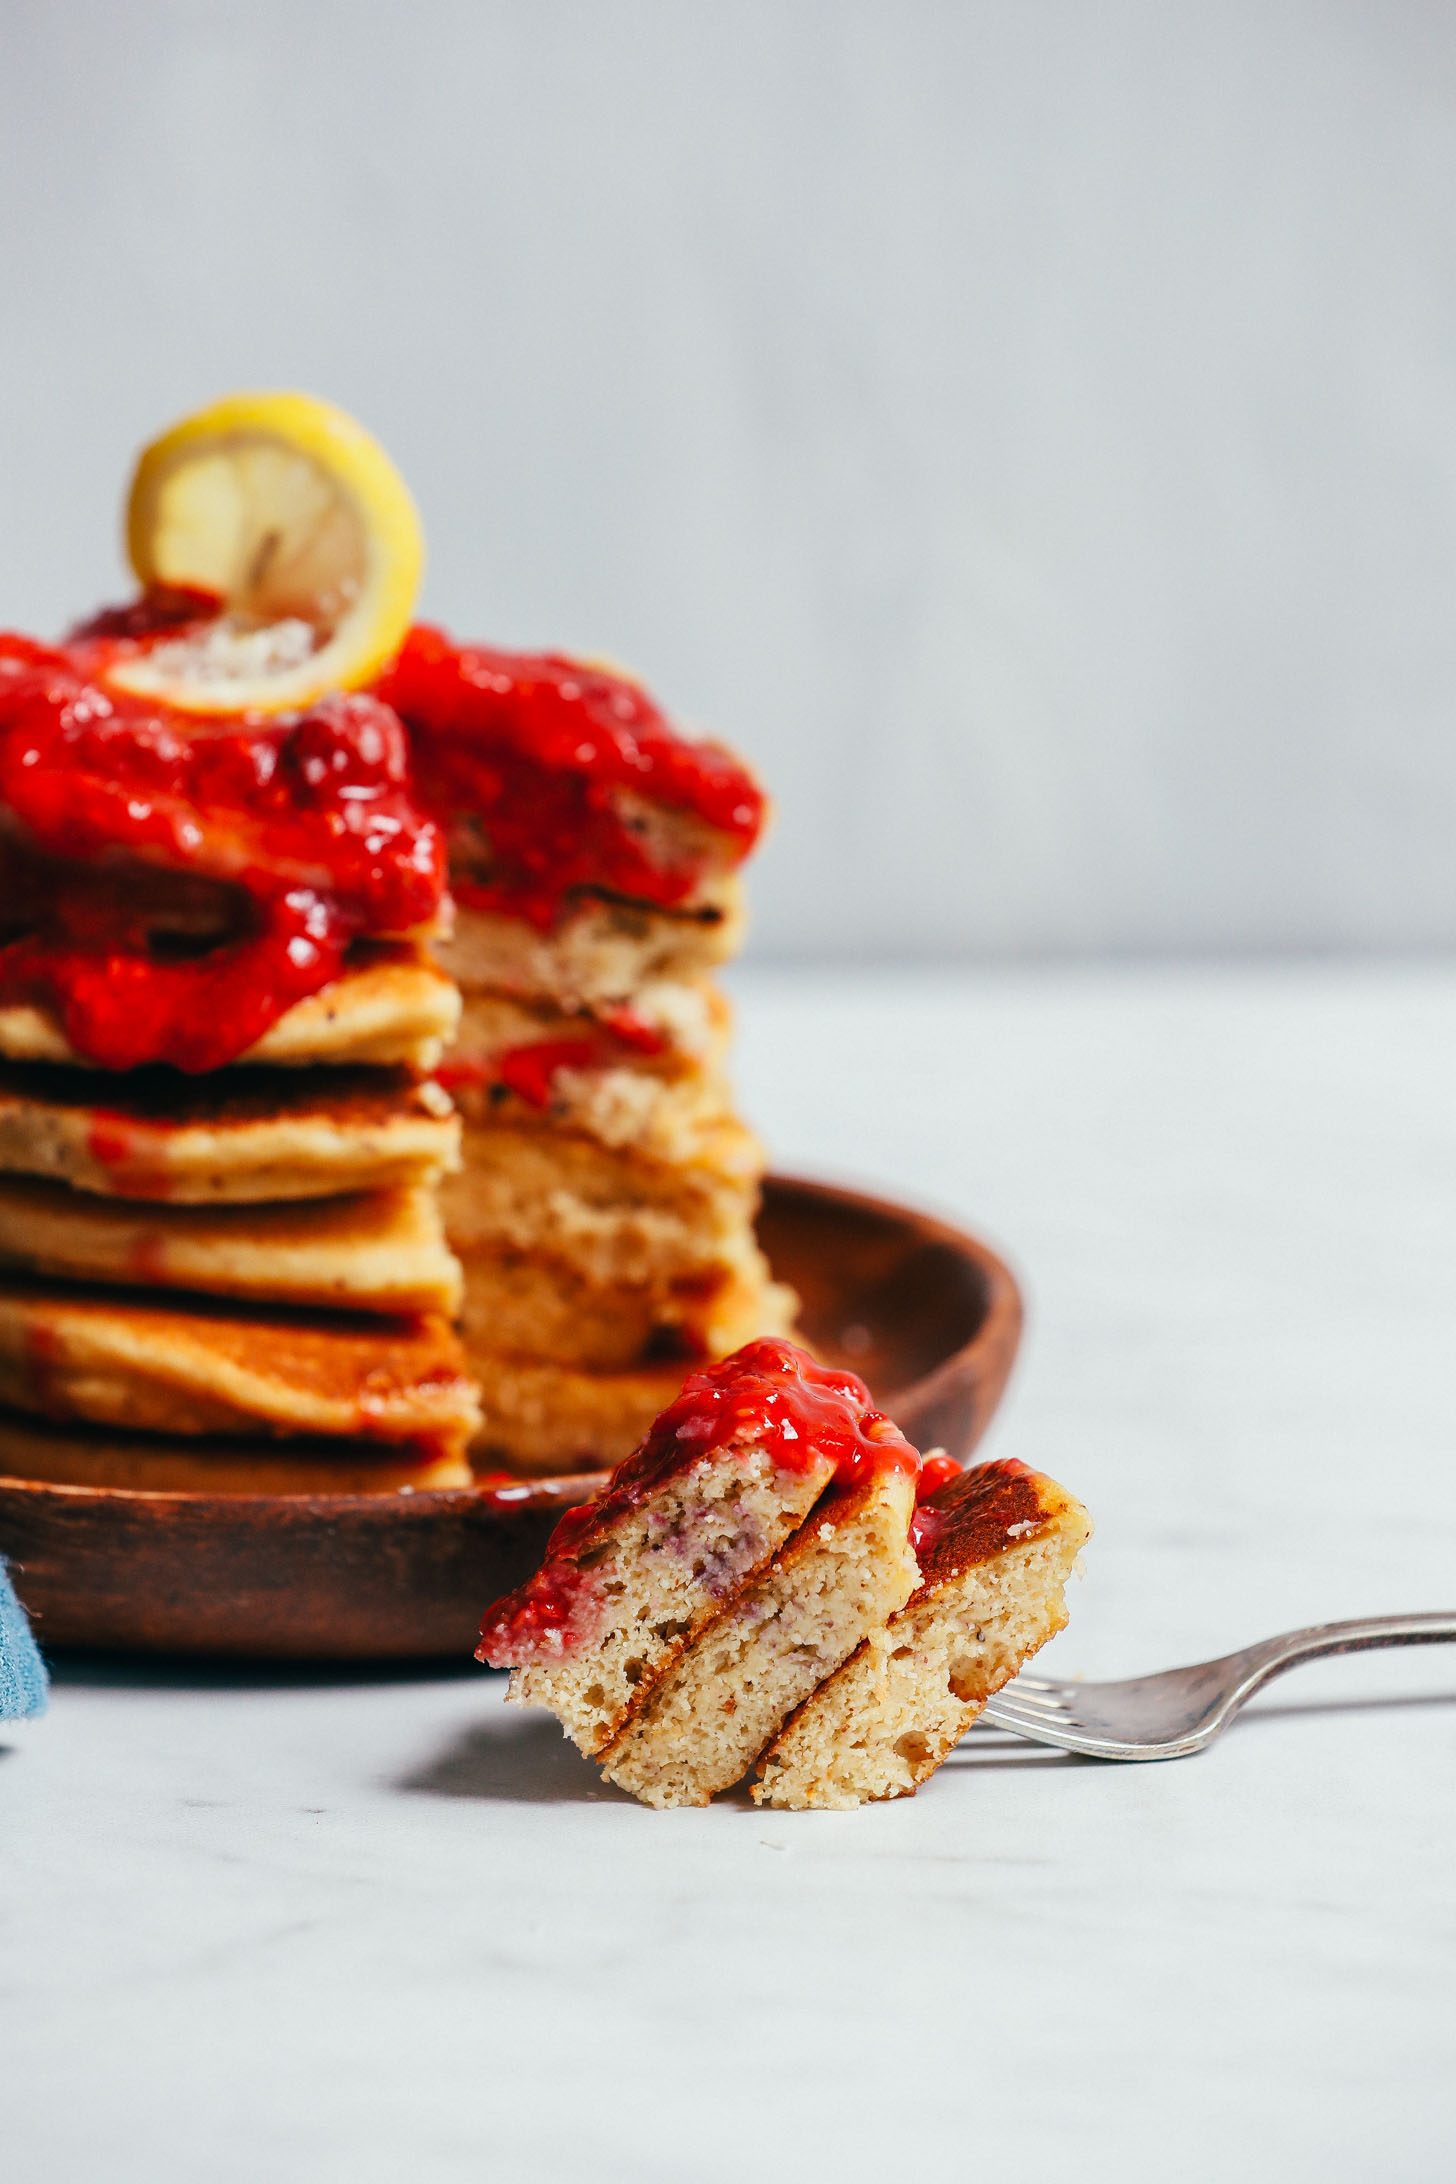 Bite of Grain-Free Pancakes with berry compote resting on a fork beside a plate